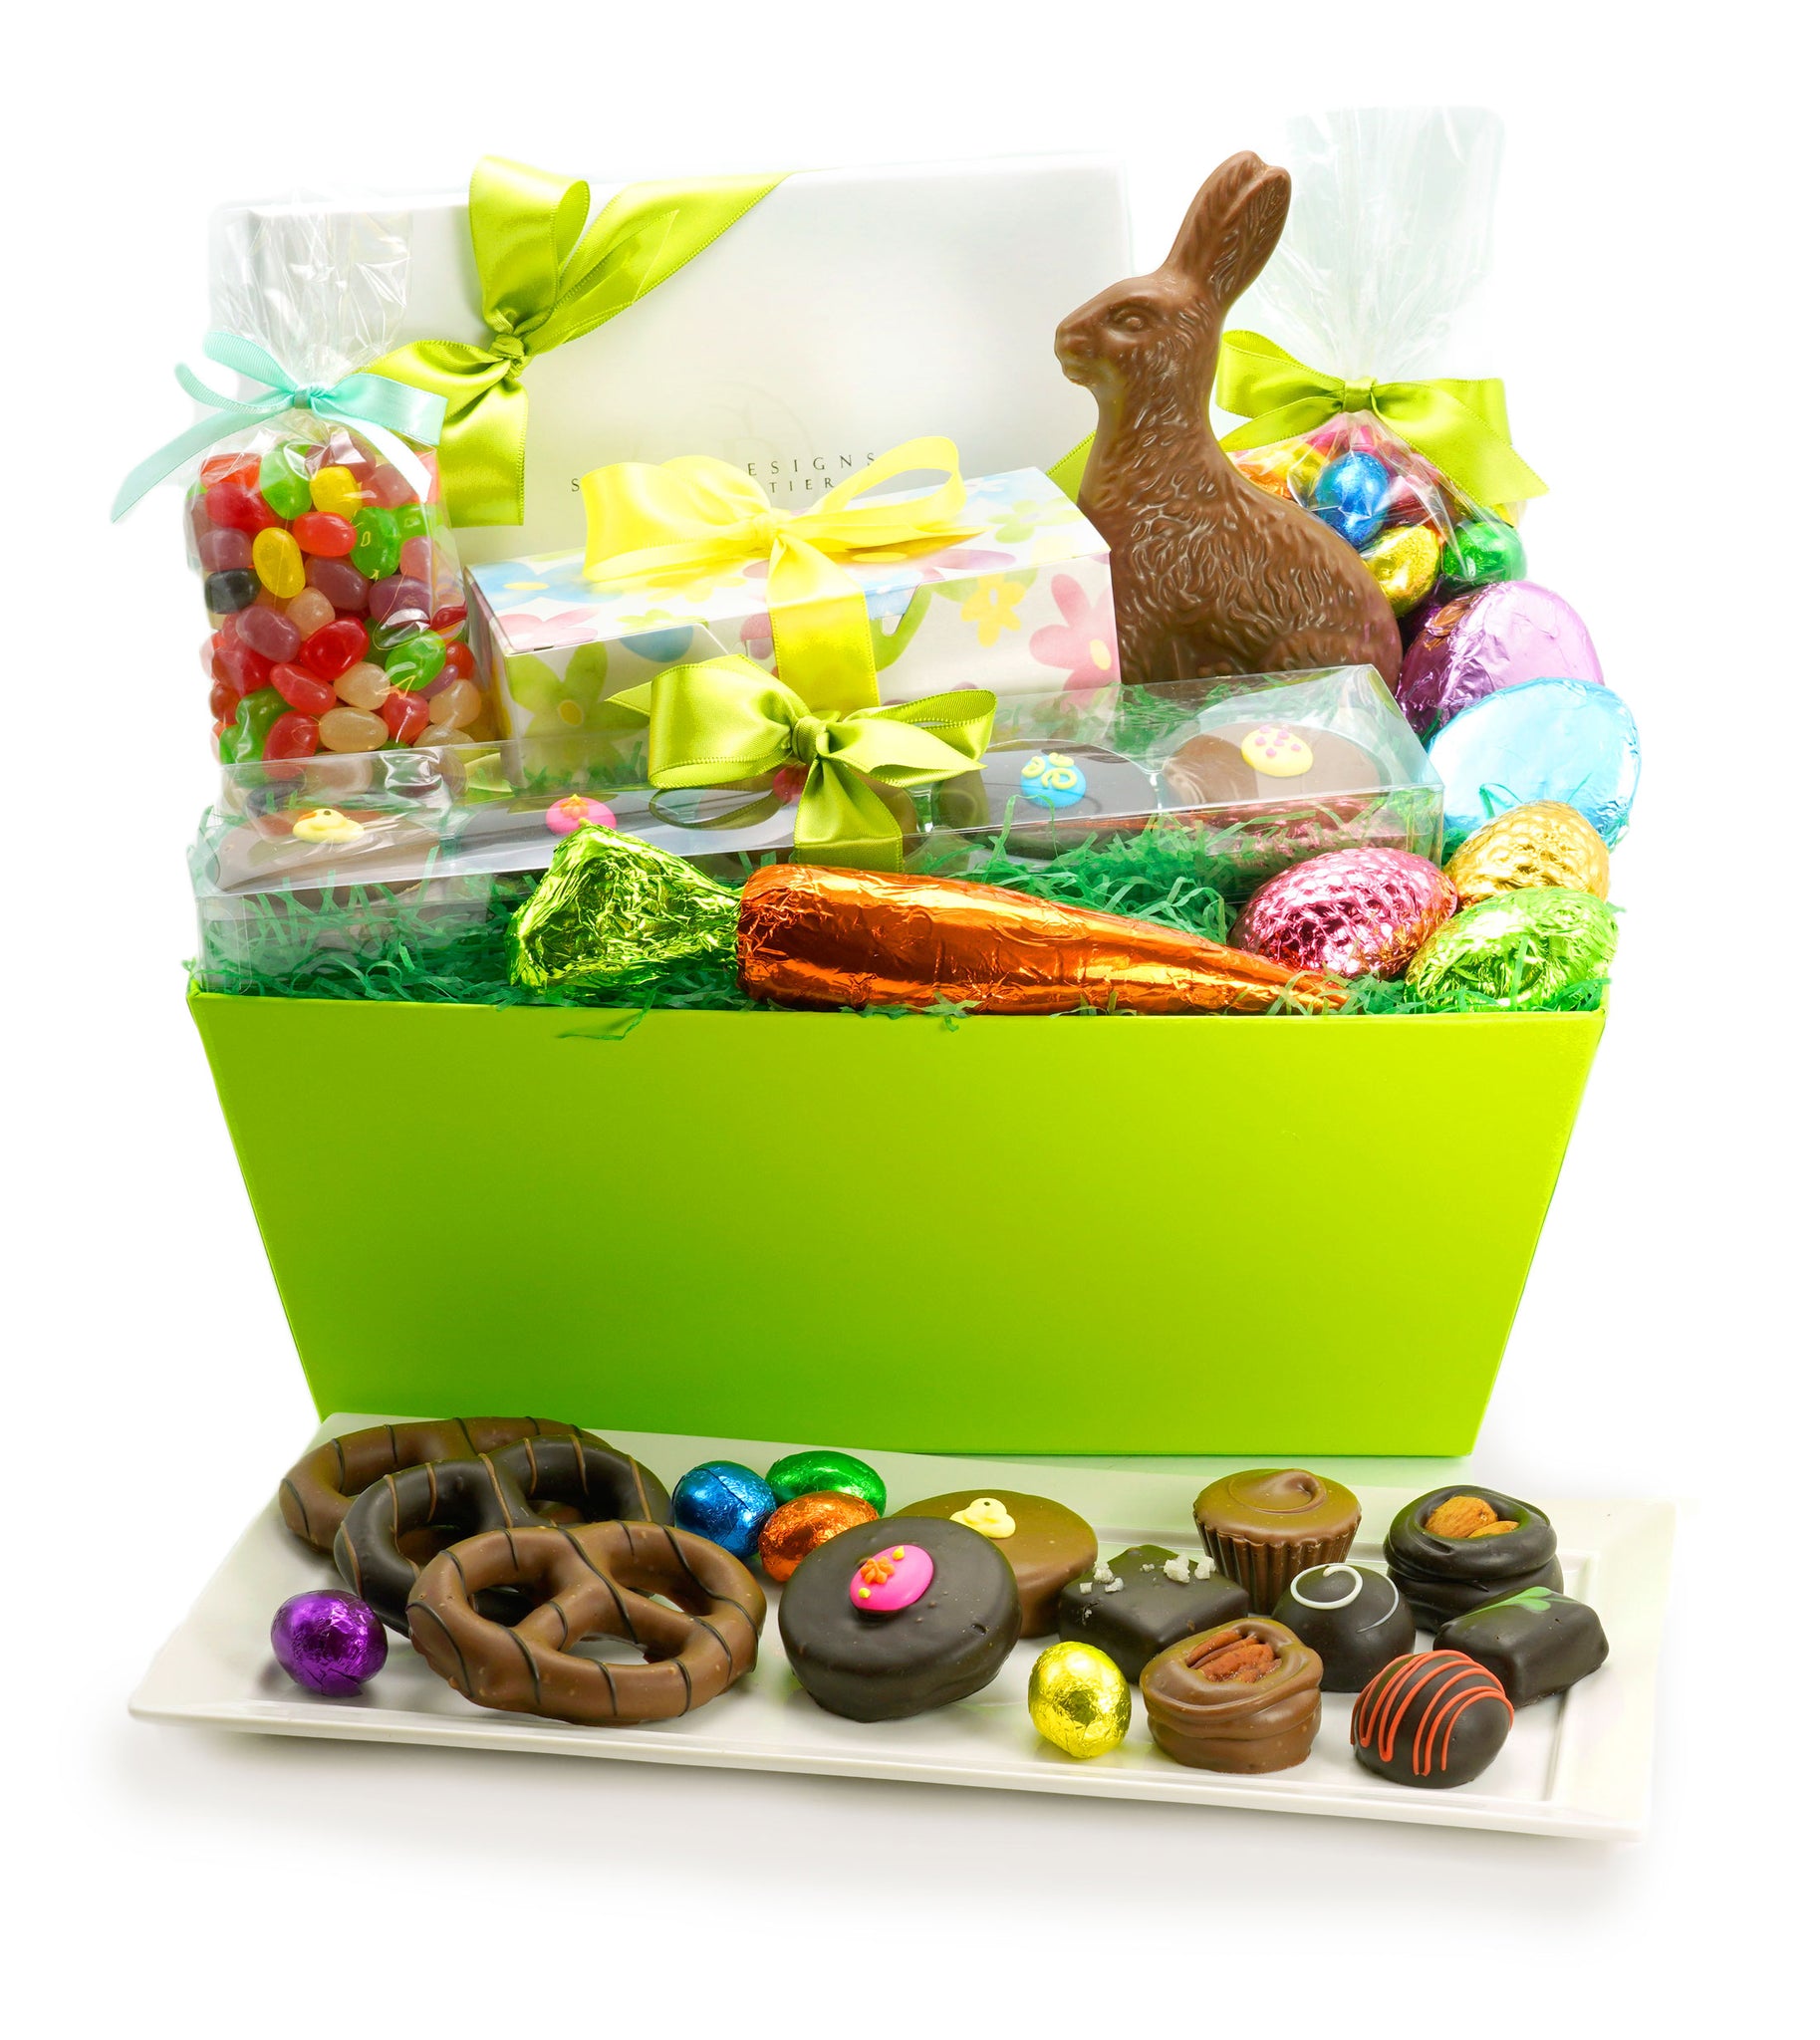 Easter treats in a green box